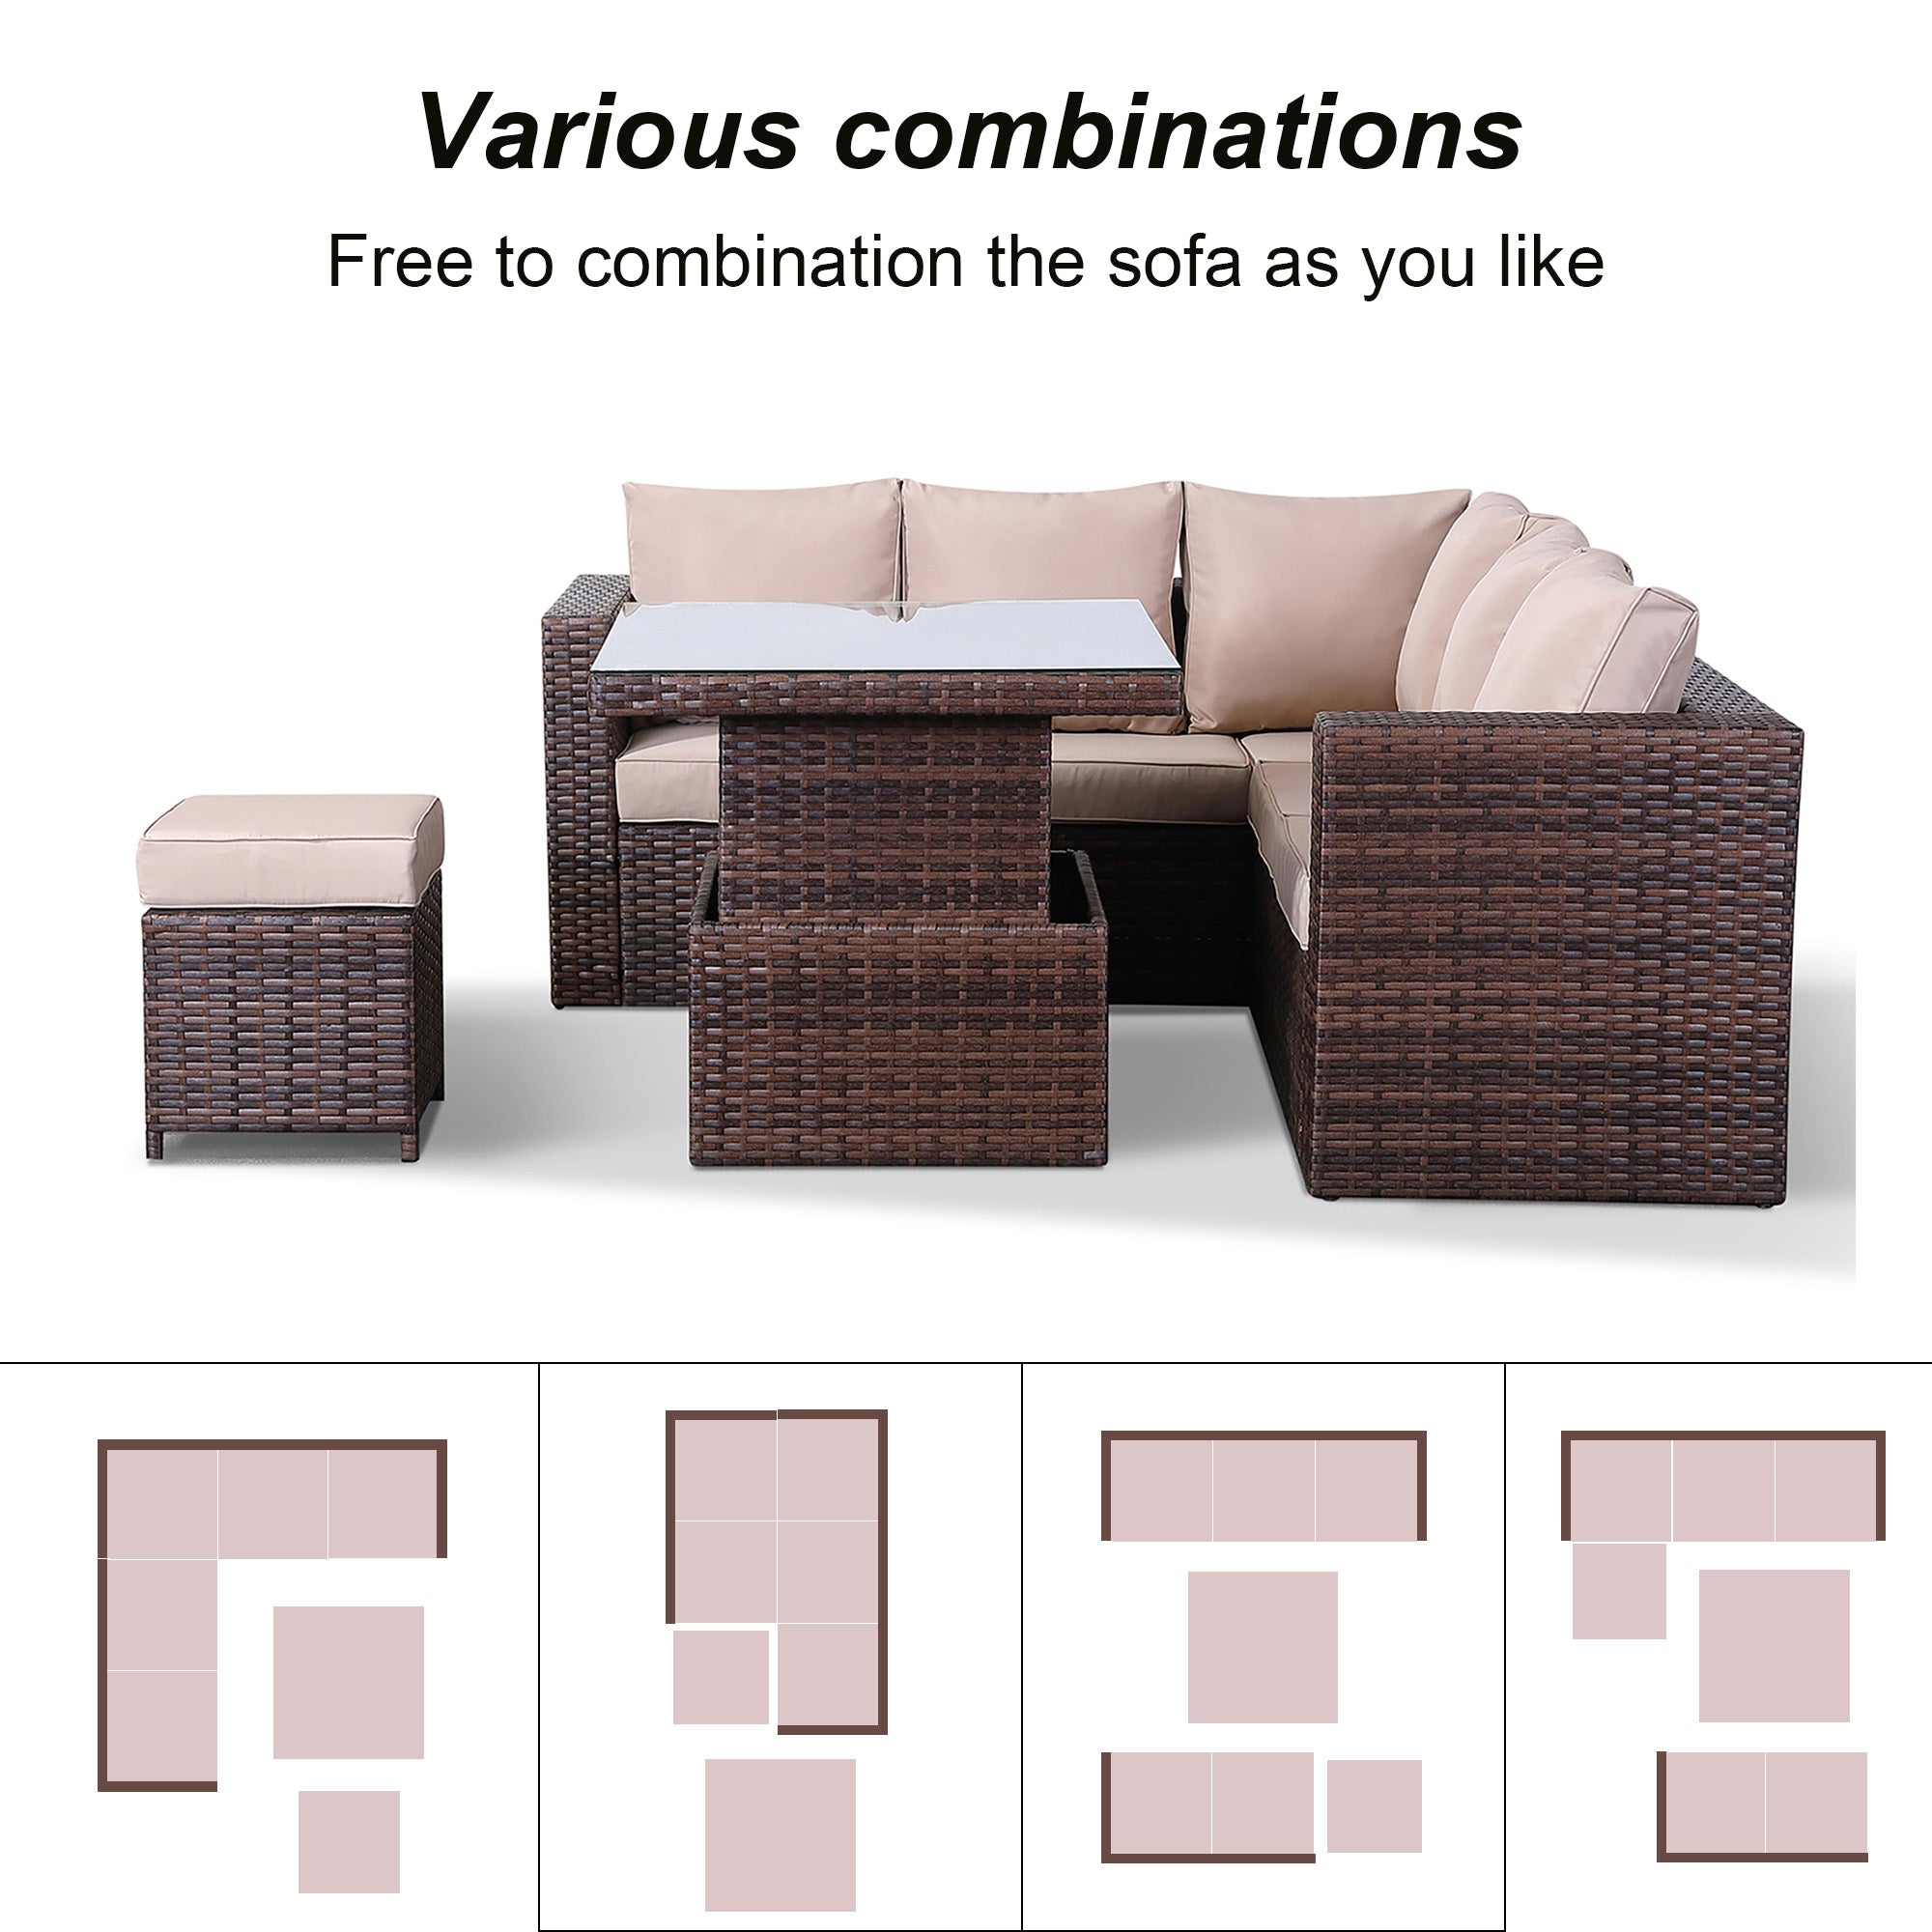 Lily Range Small Dining Corner Sofa Set with Rising Table In Brown